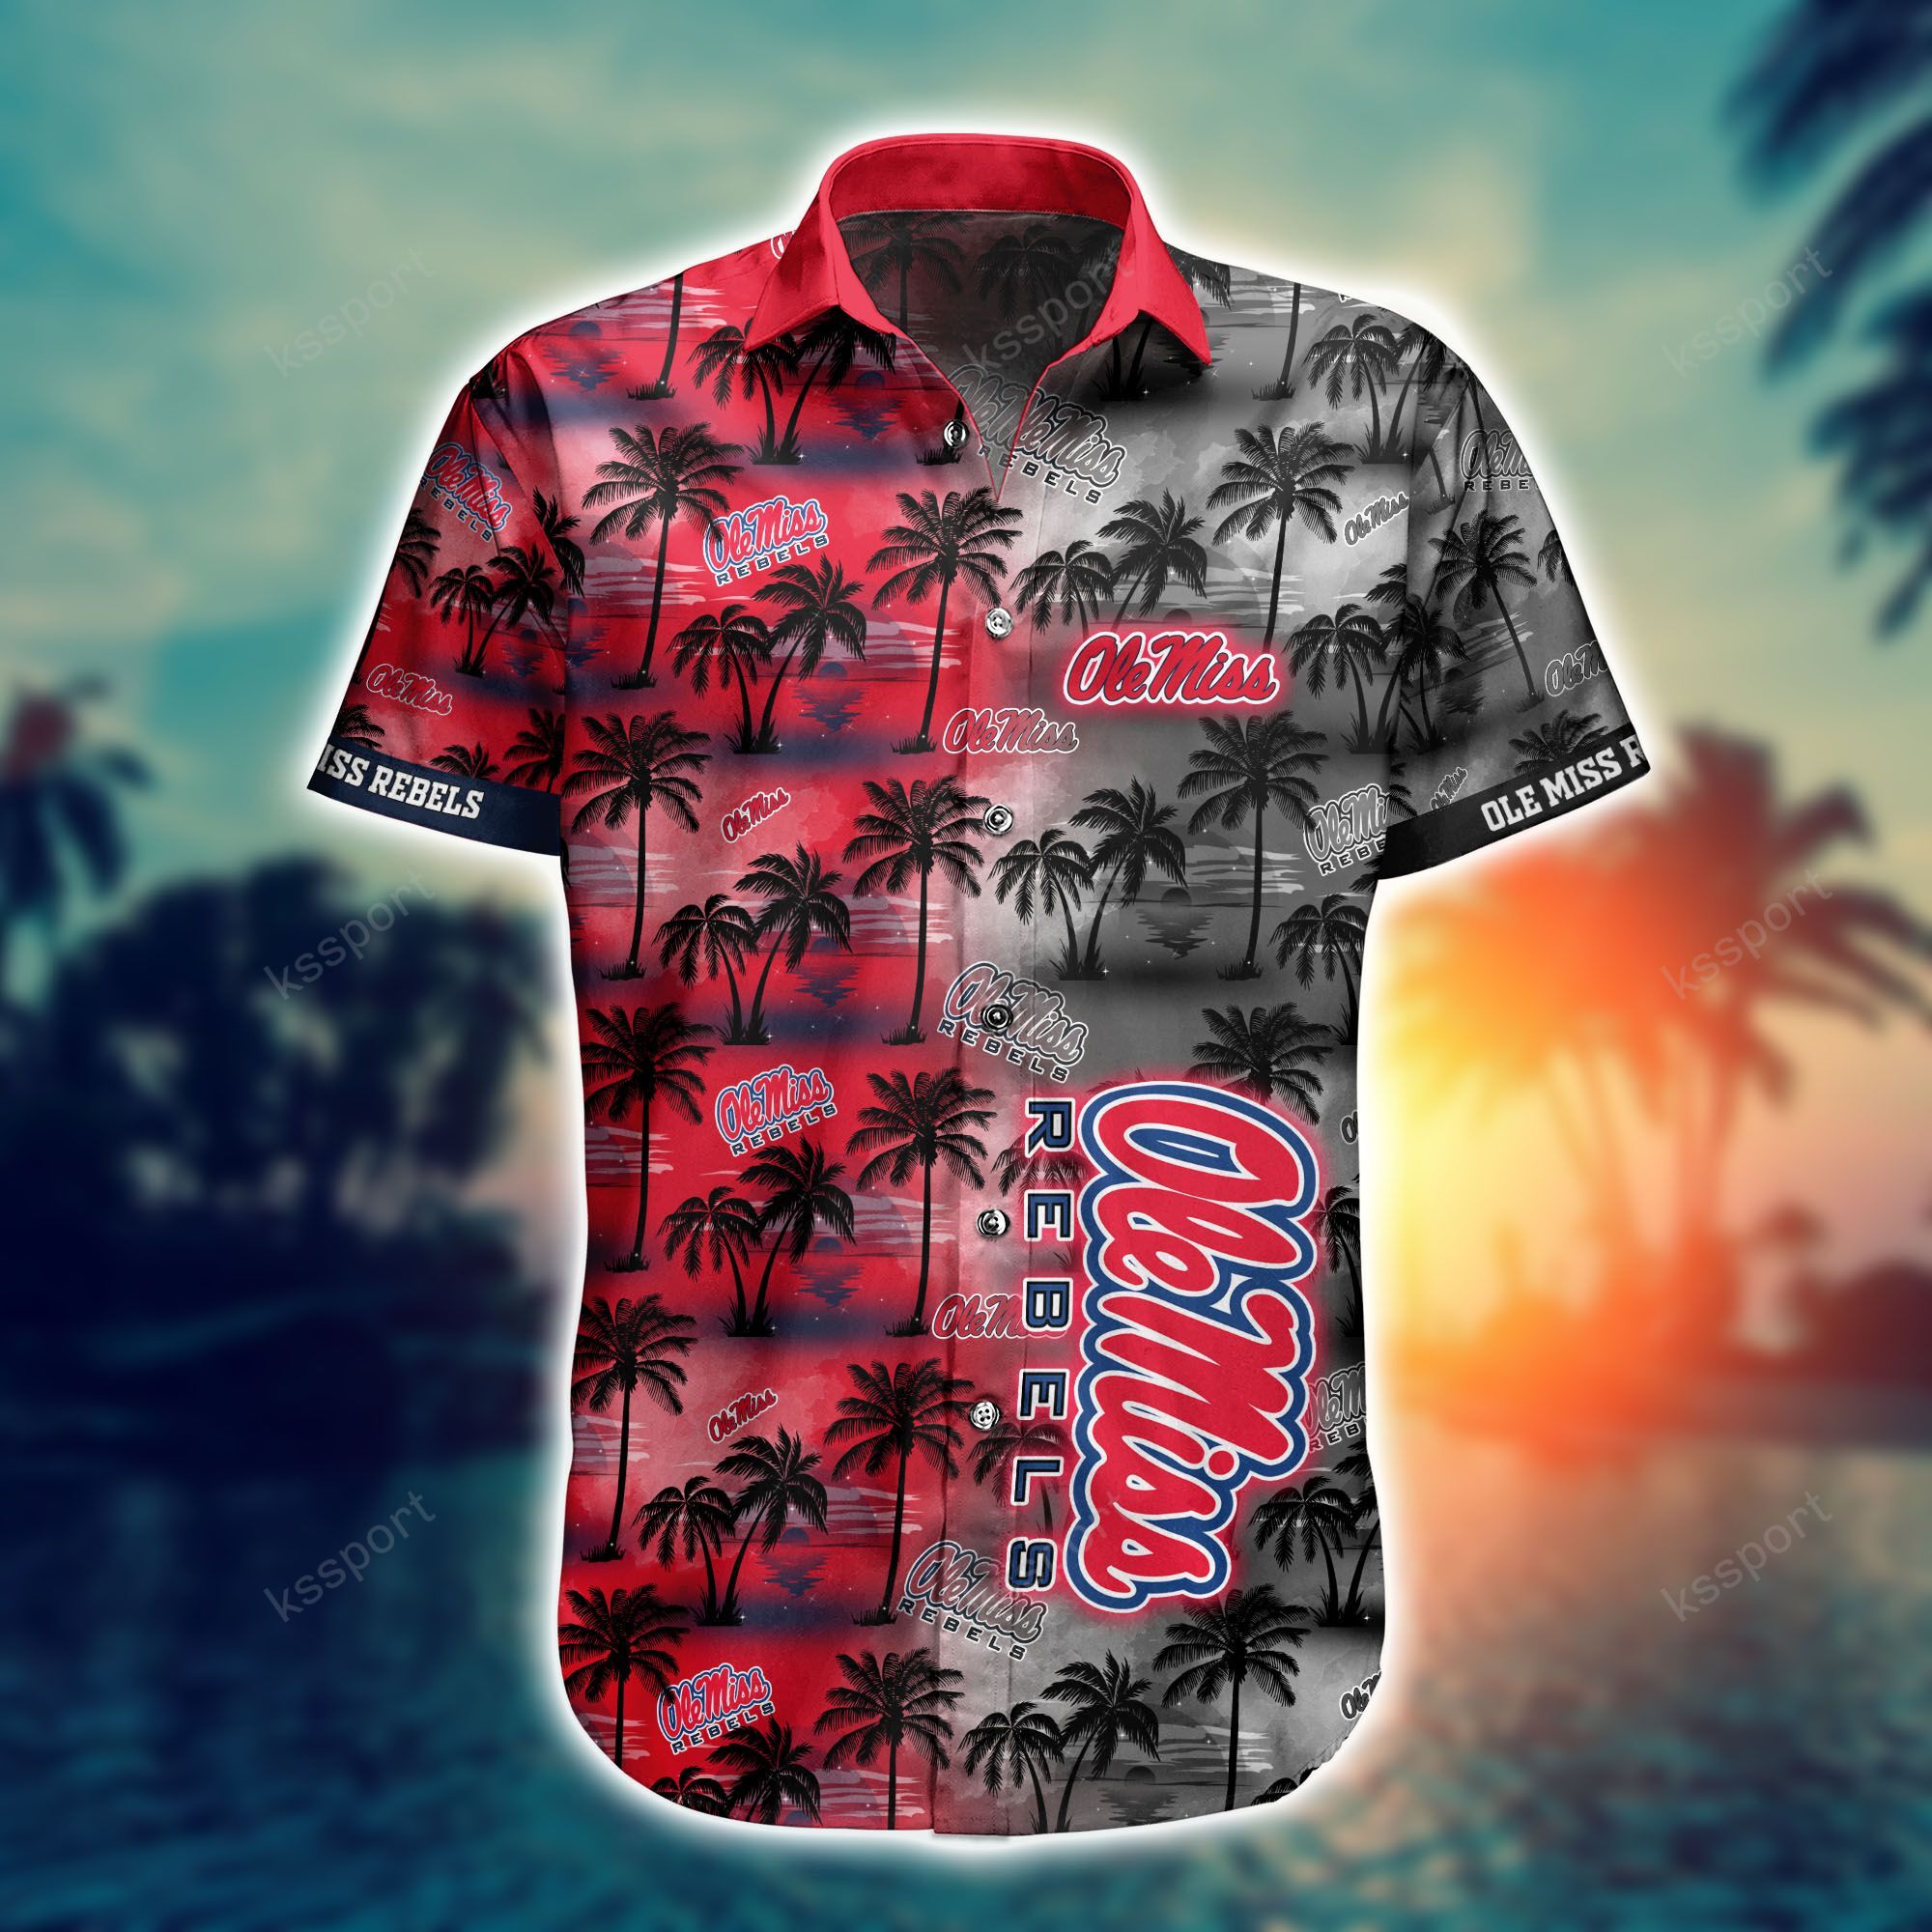 Top cool Hawaiian shirt 2022 - Make sure you get yours today before they run out! 163